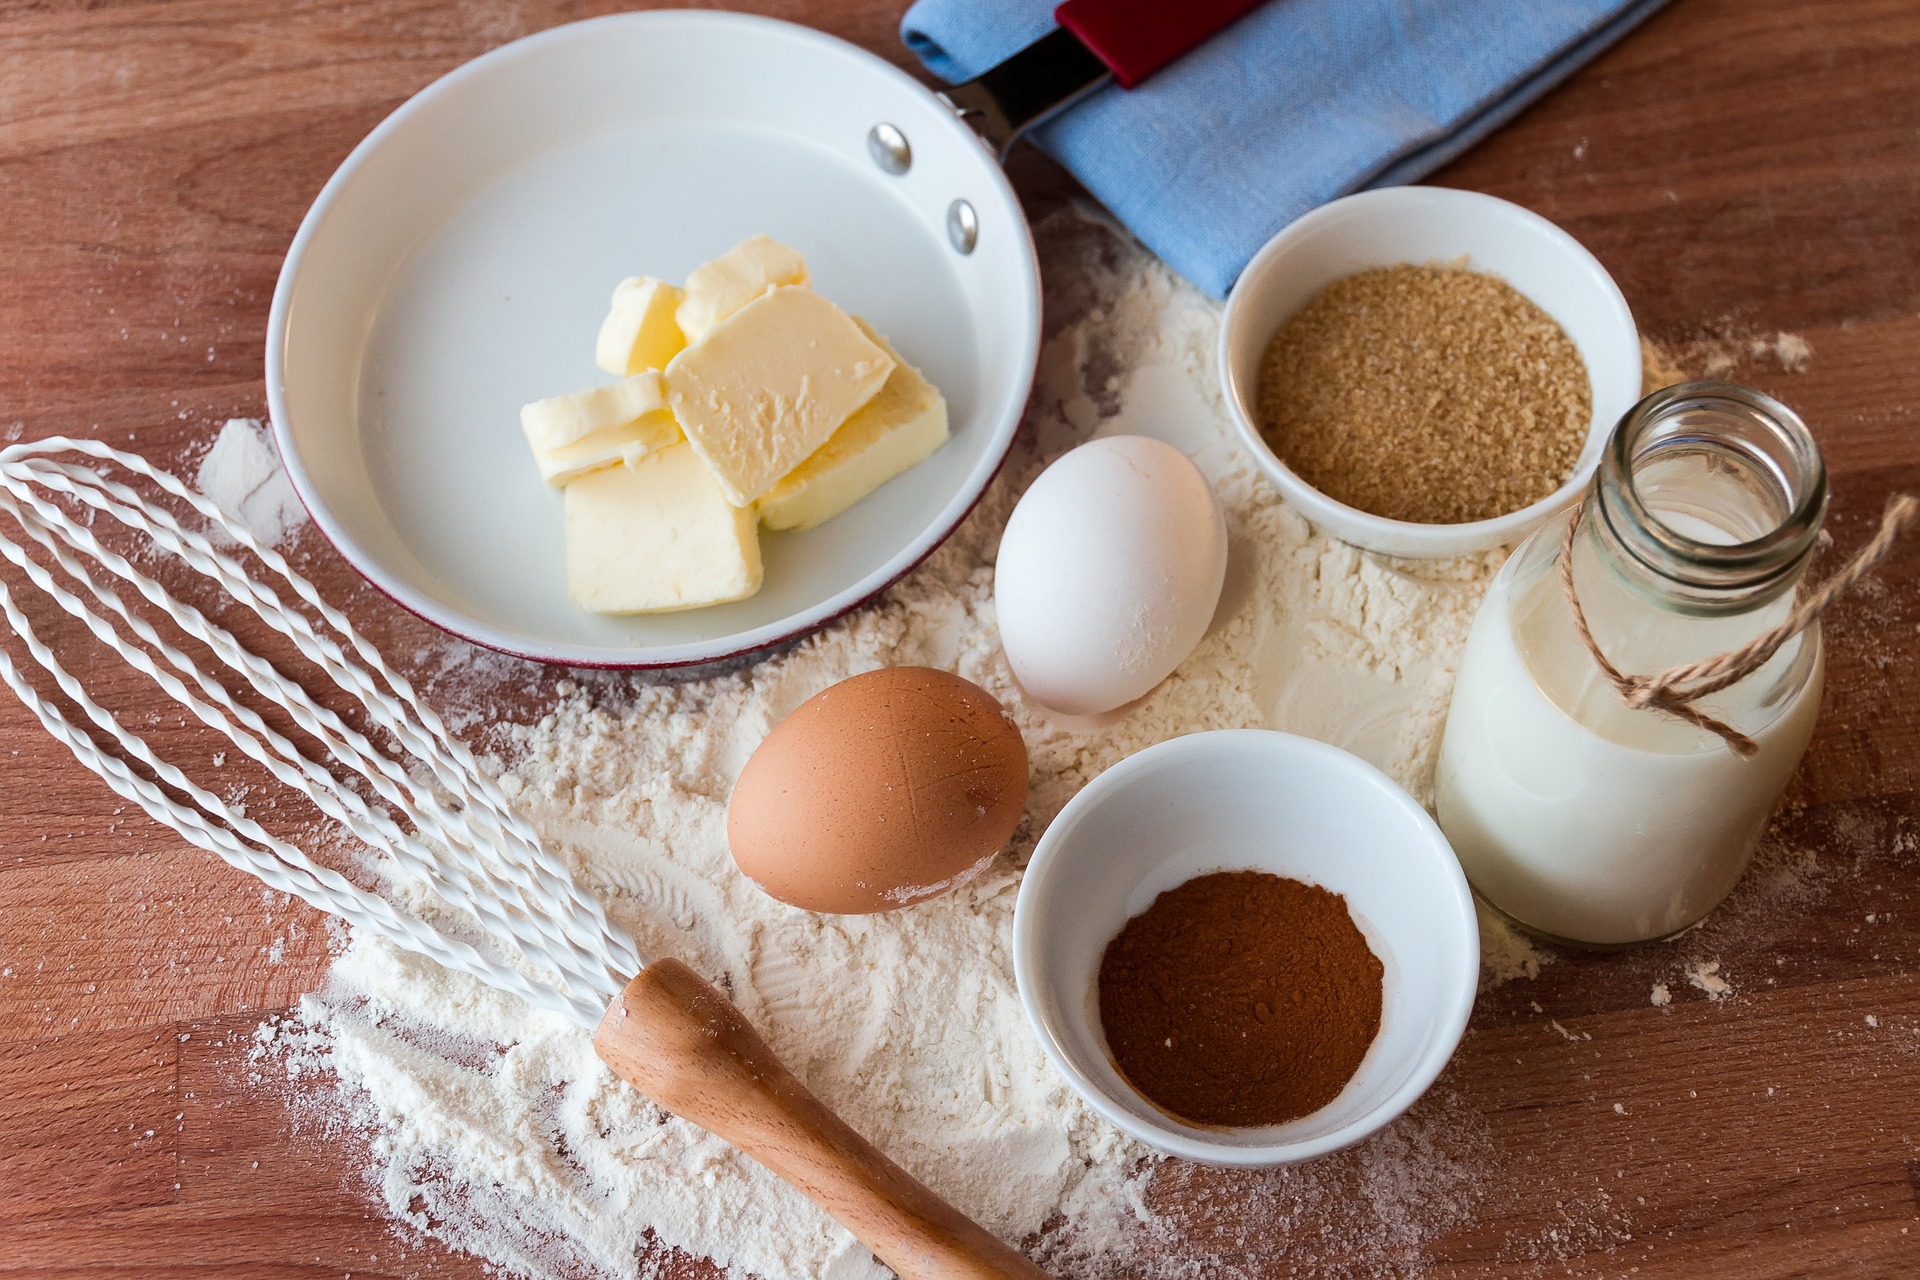 ingredients that can be added together to make a cake or pastry 